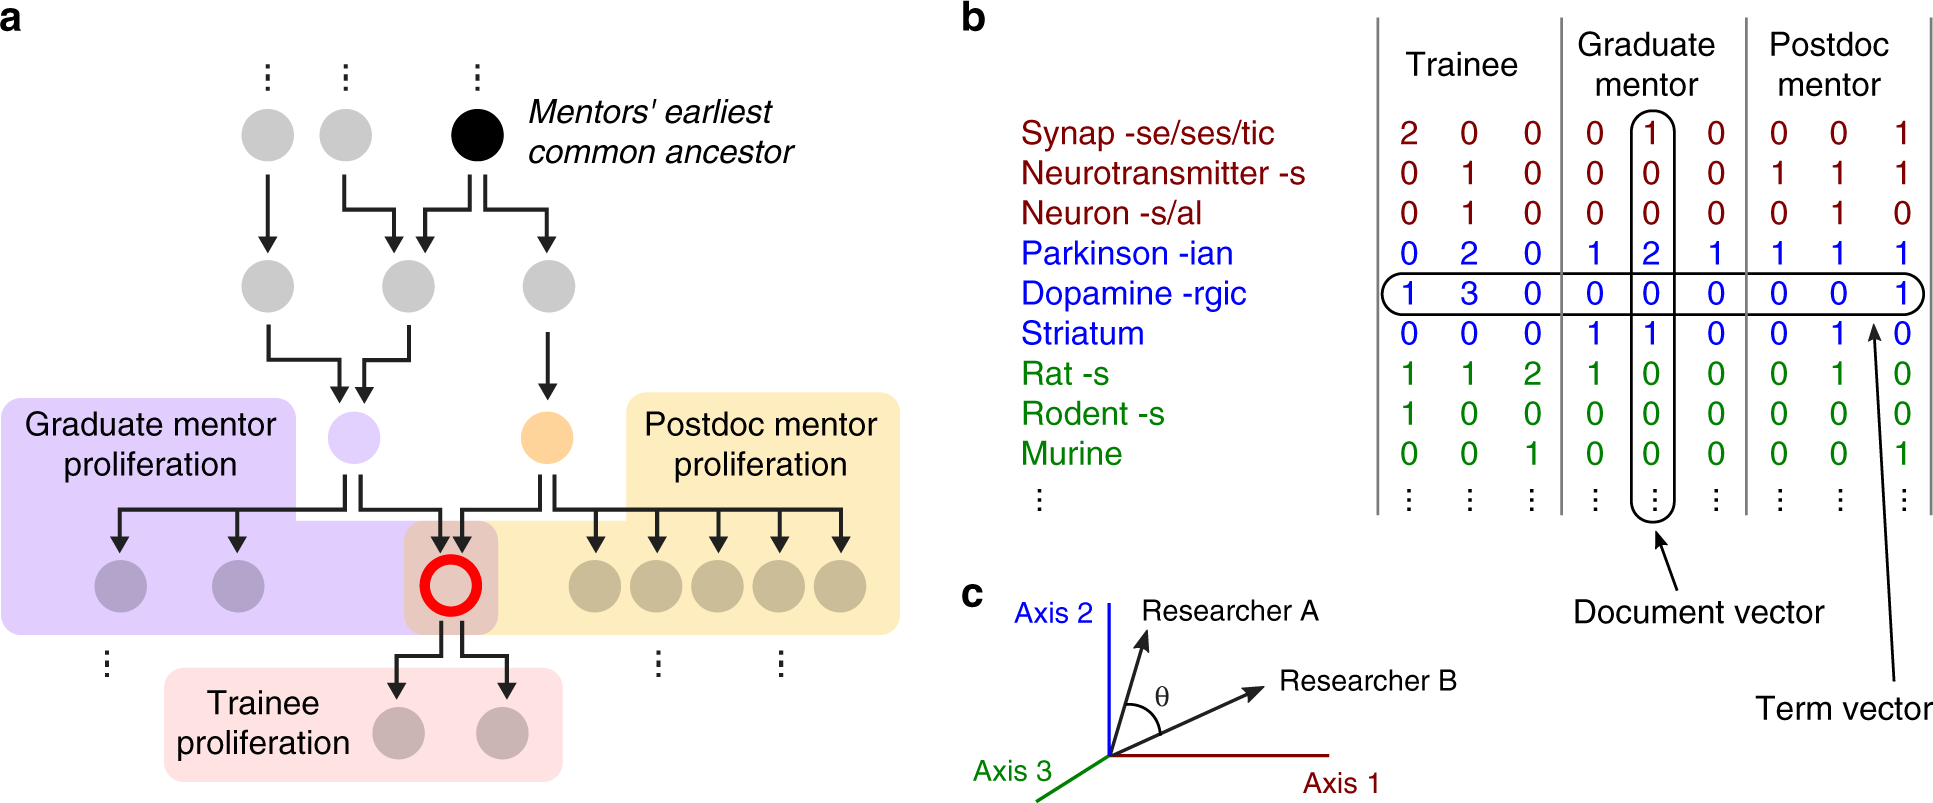 Intellectual synthesis determines in academic careers | Nature Communications